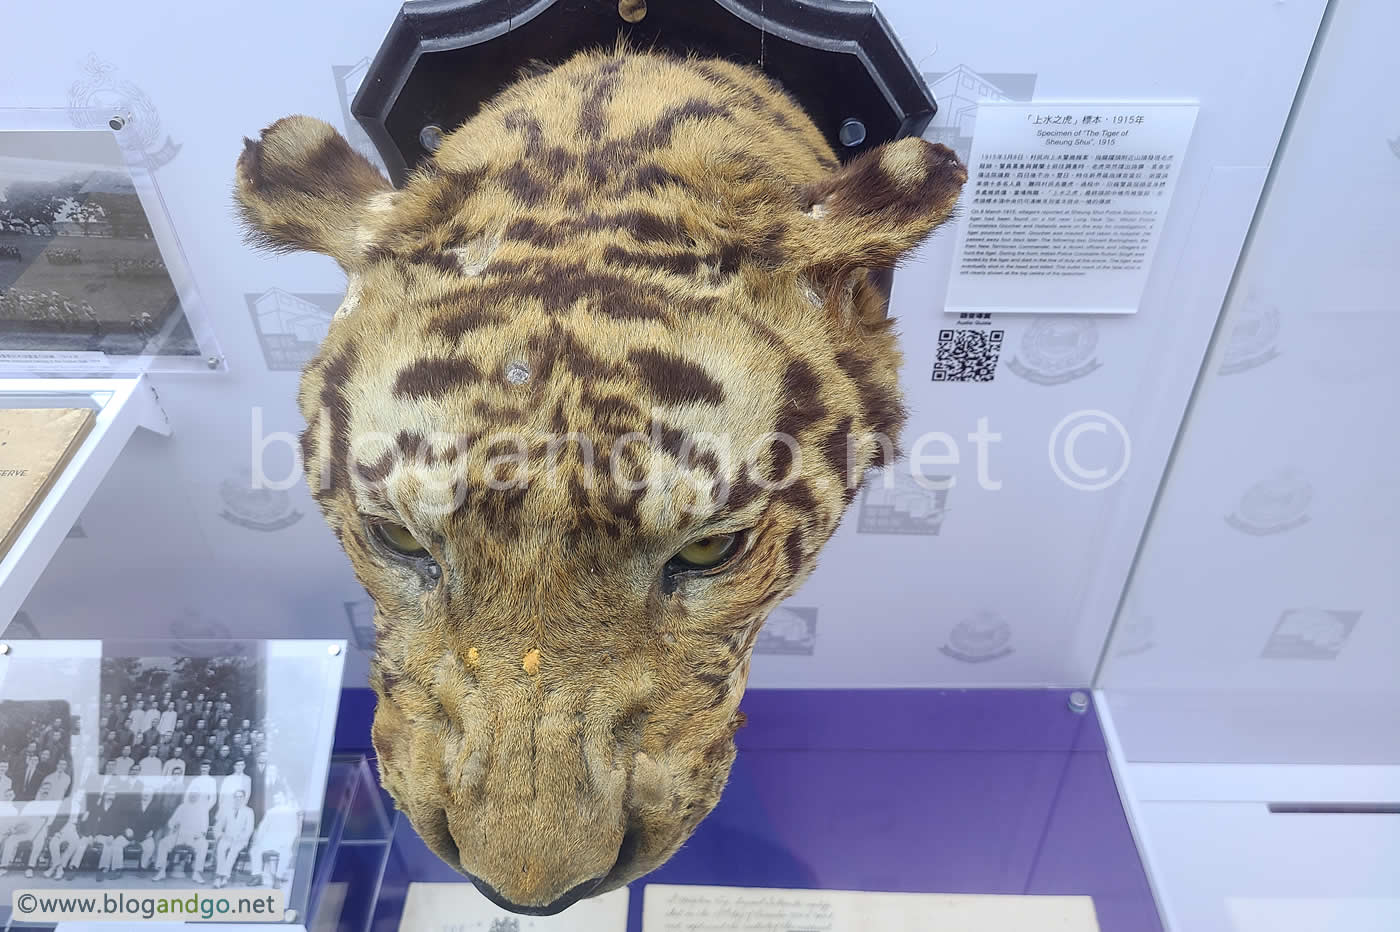 Police Museum - Tiger on the Loose